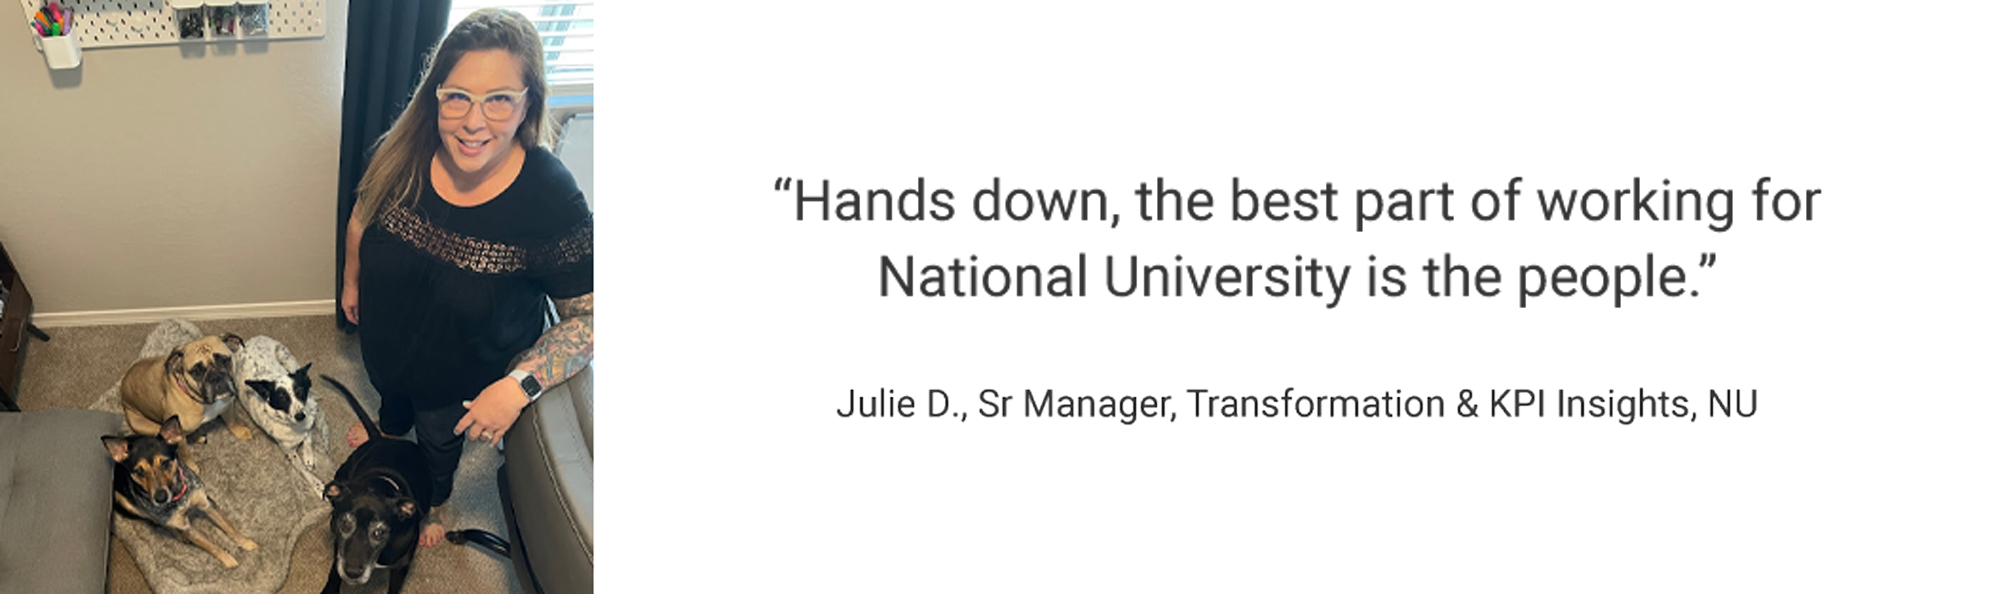 Employee Testimonial, "Hands down, the best part of working for National University is the people." Julie D., Sr Manager, Transformation & KPI Insights, NU